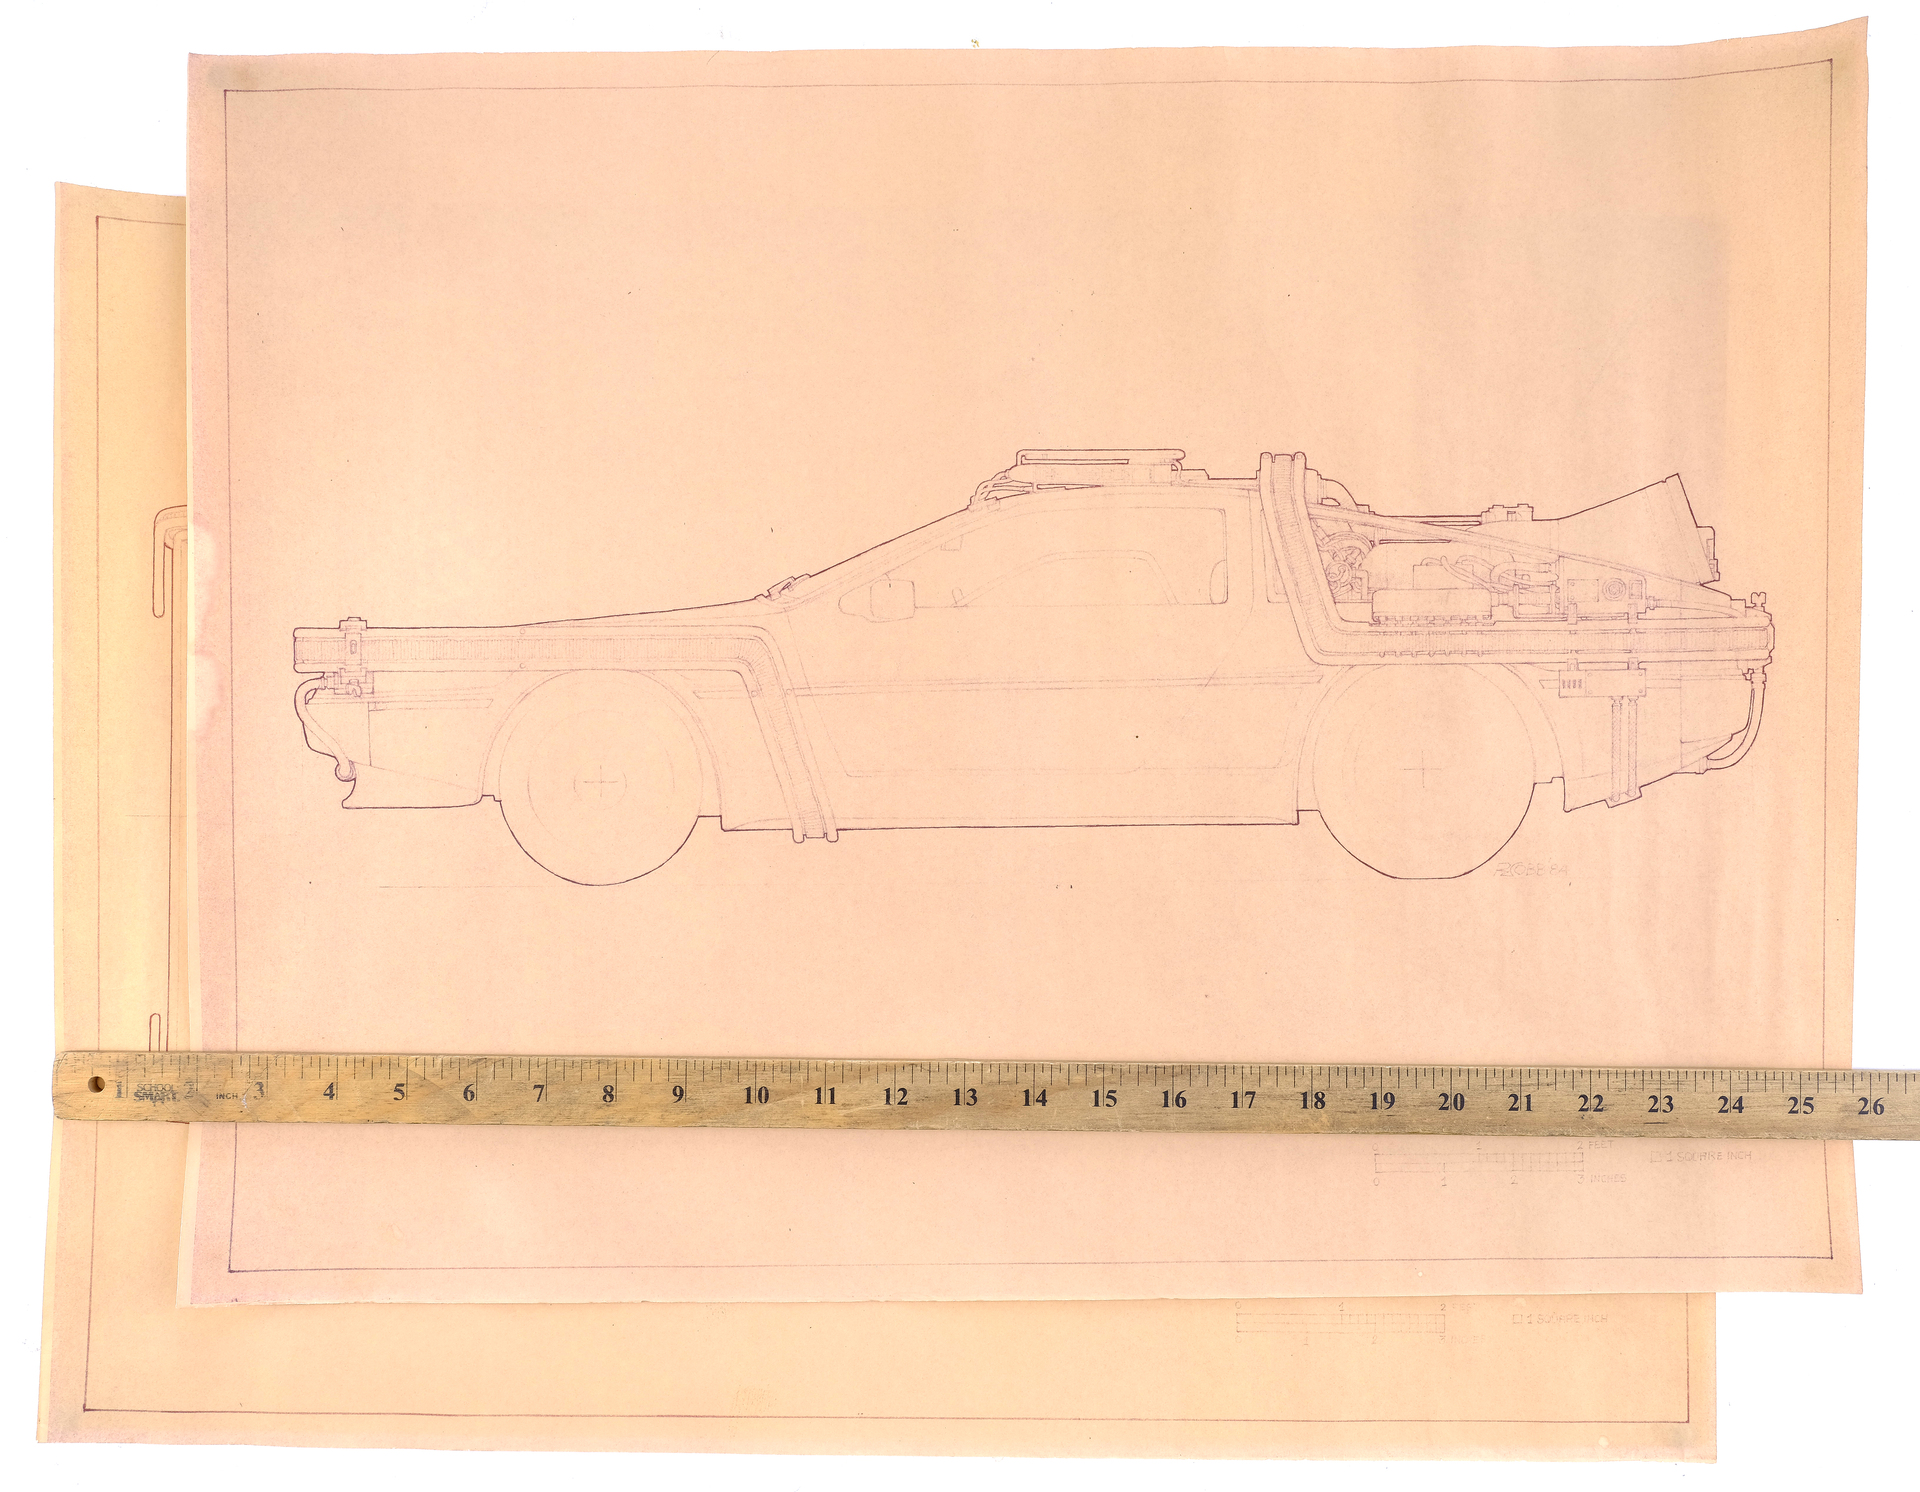 BACK TO THE FUTURE - Pair of Printed Ron Cobb DeLorean Time Machine Blueprints - Image 4 of 4